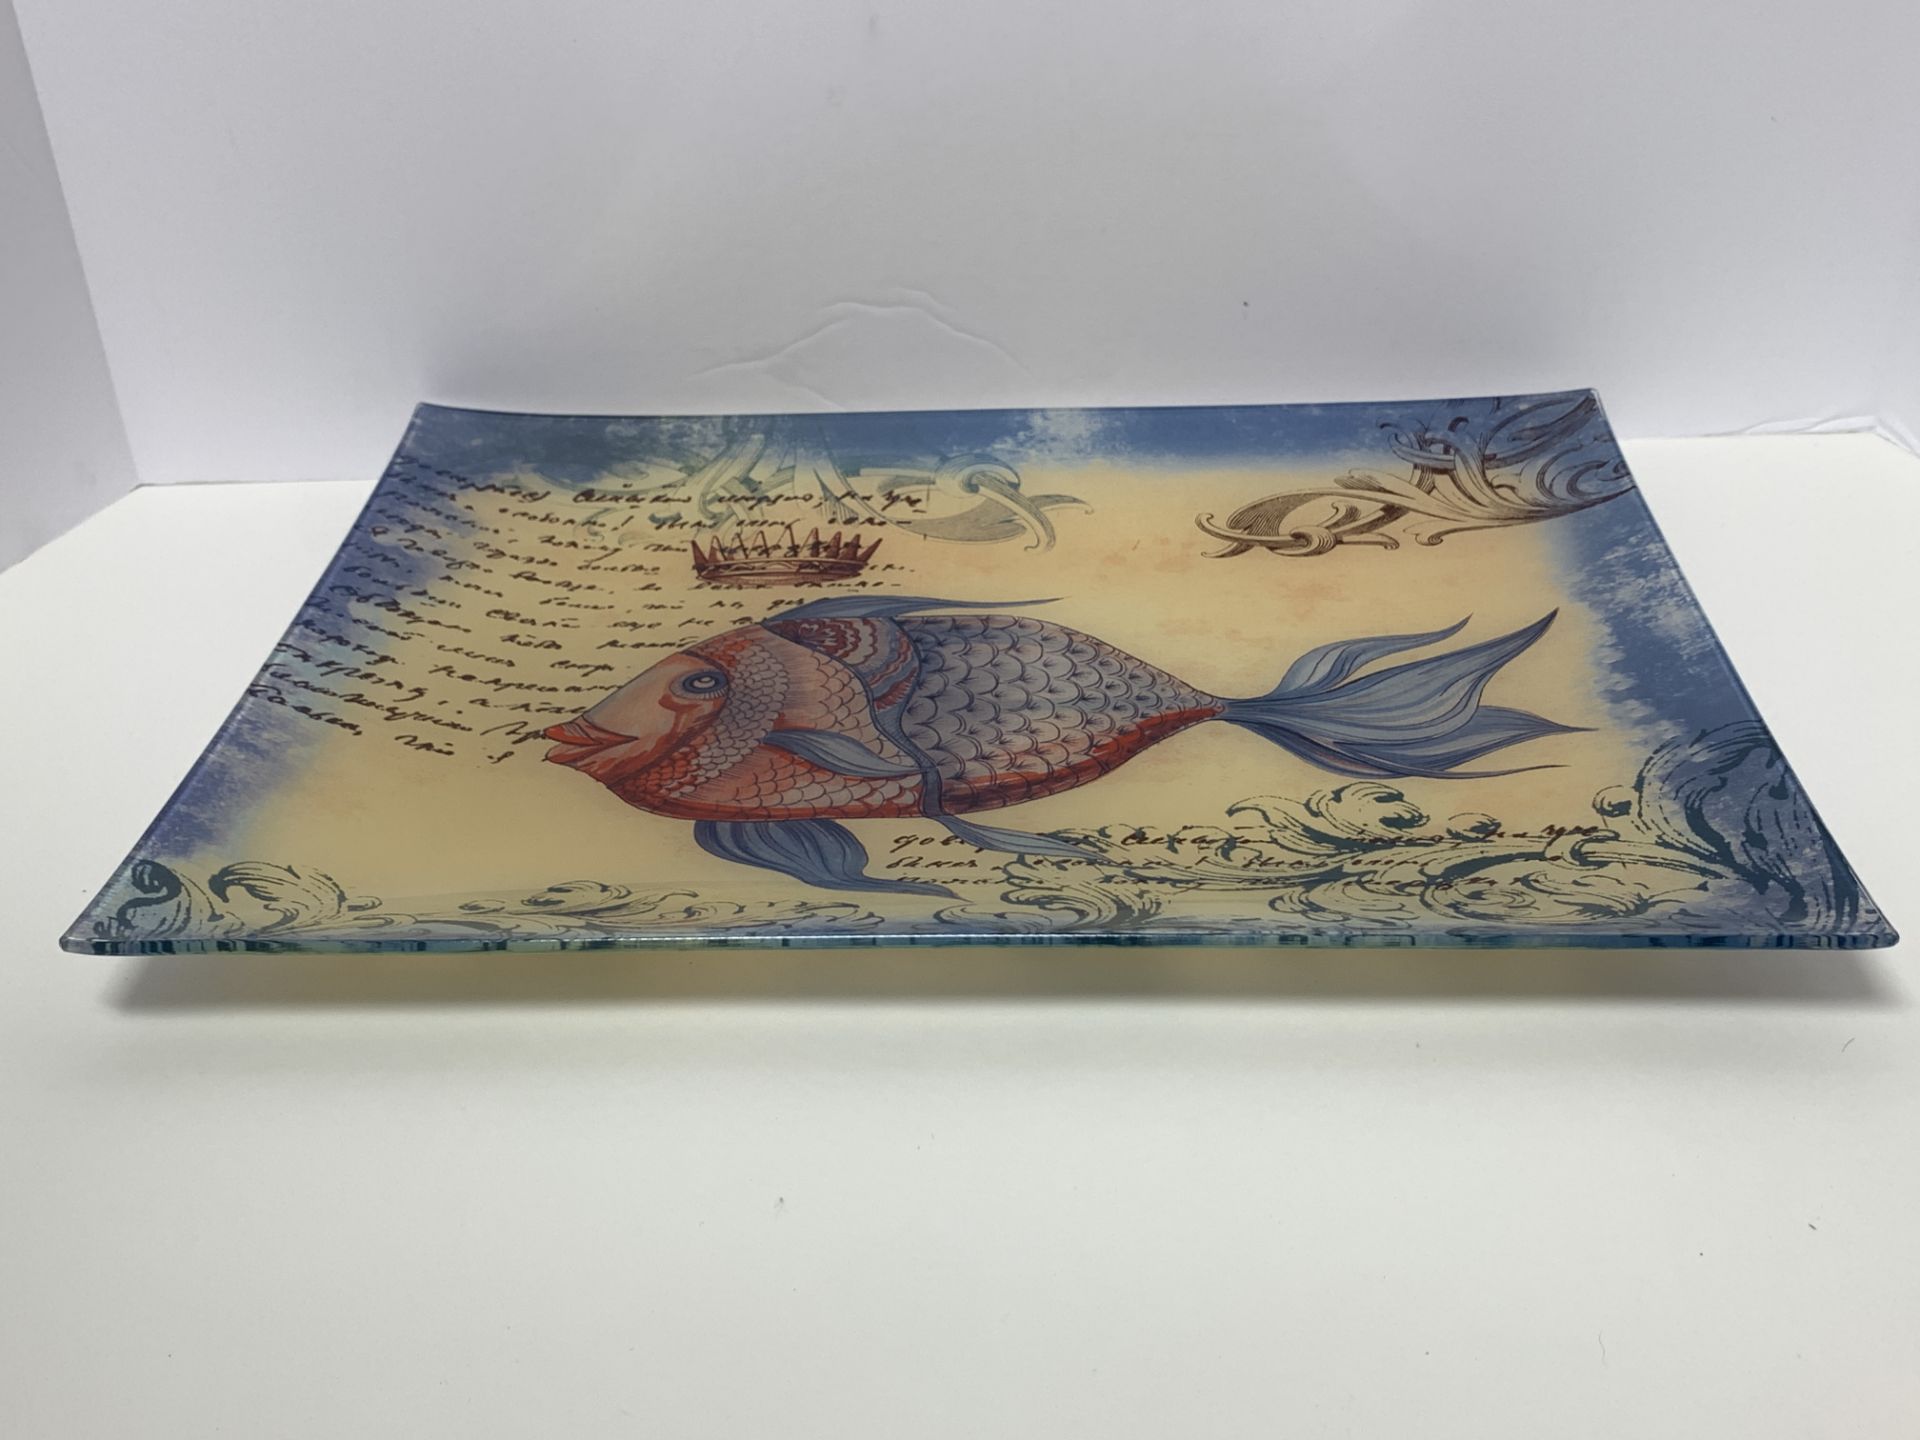 DECORATIVE GLASS FISH ROYAL PRINT SERVING PLATE - Image 3 of 4